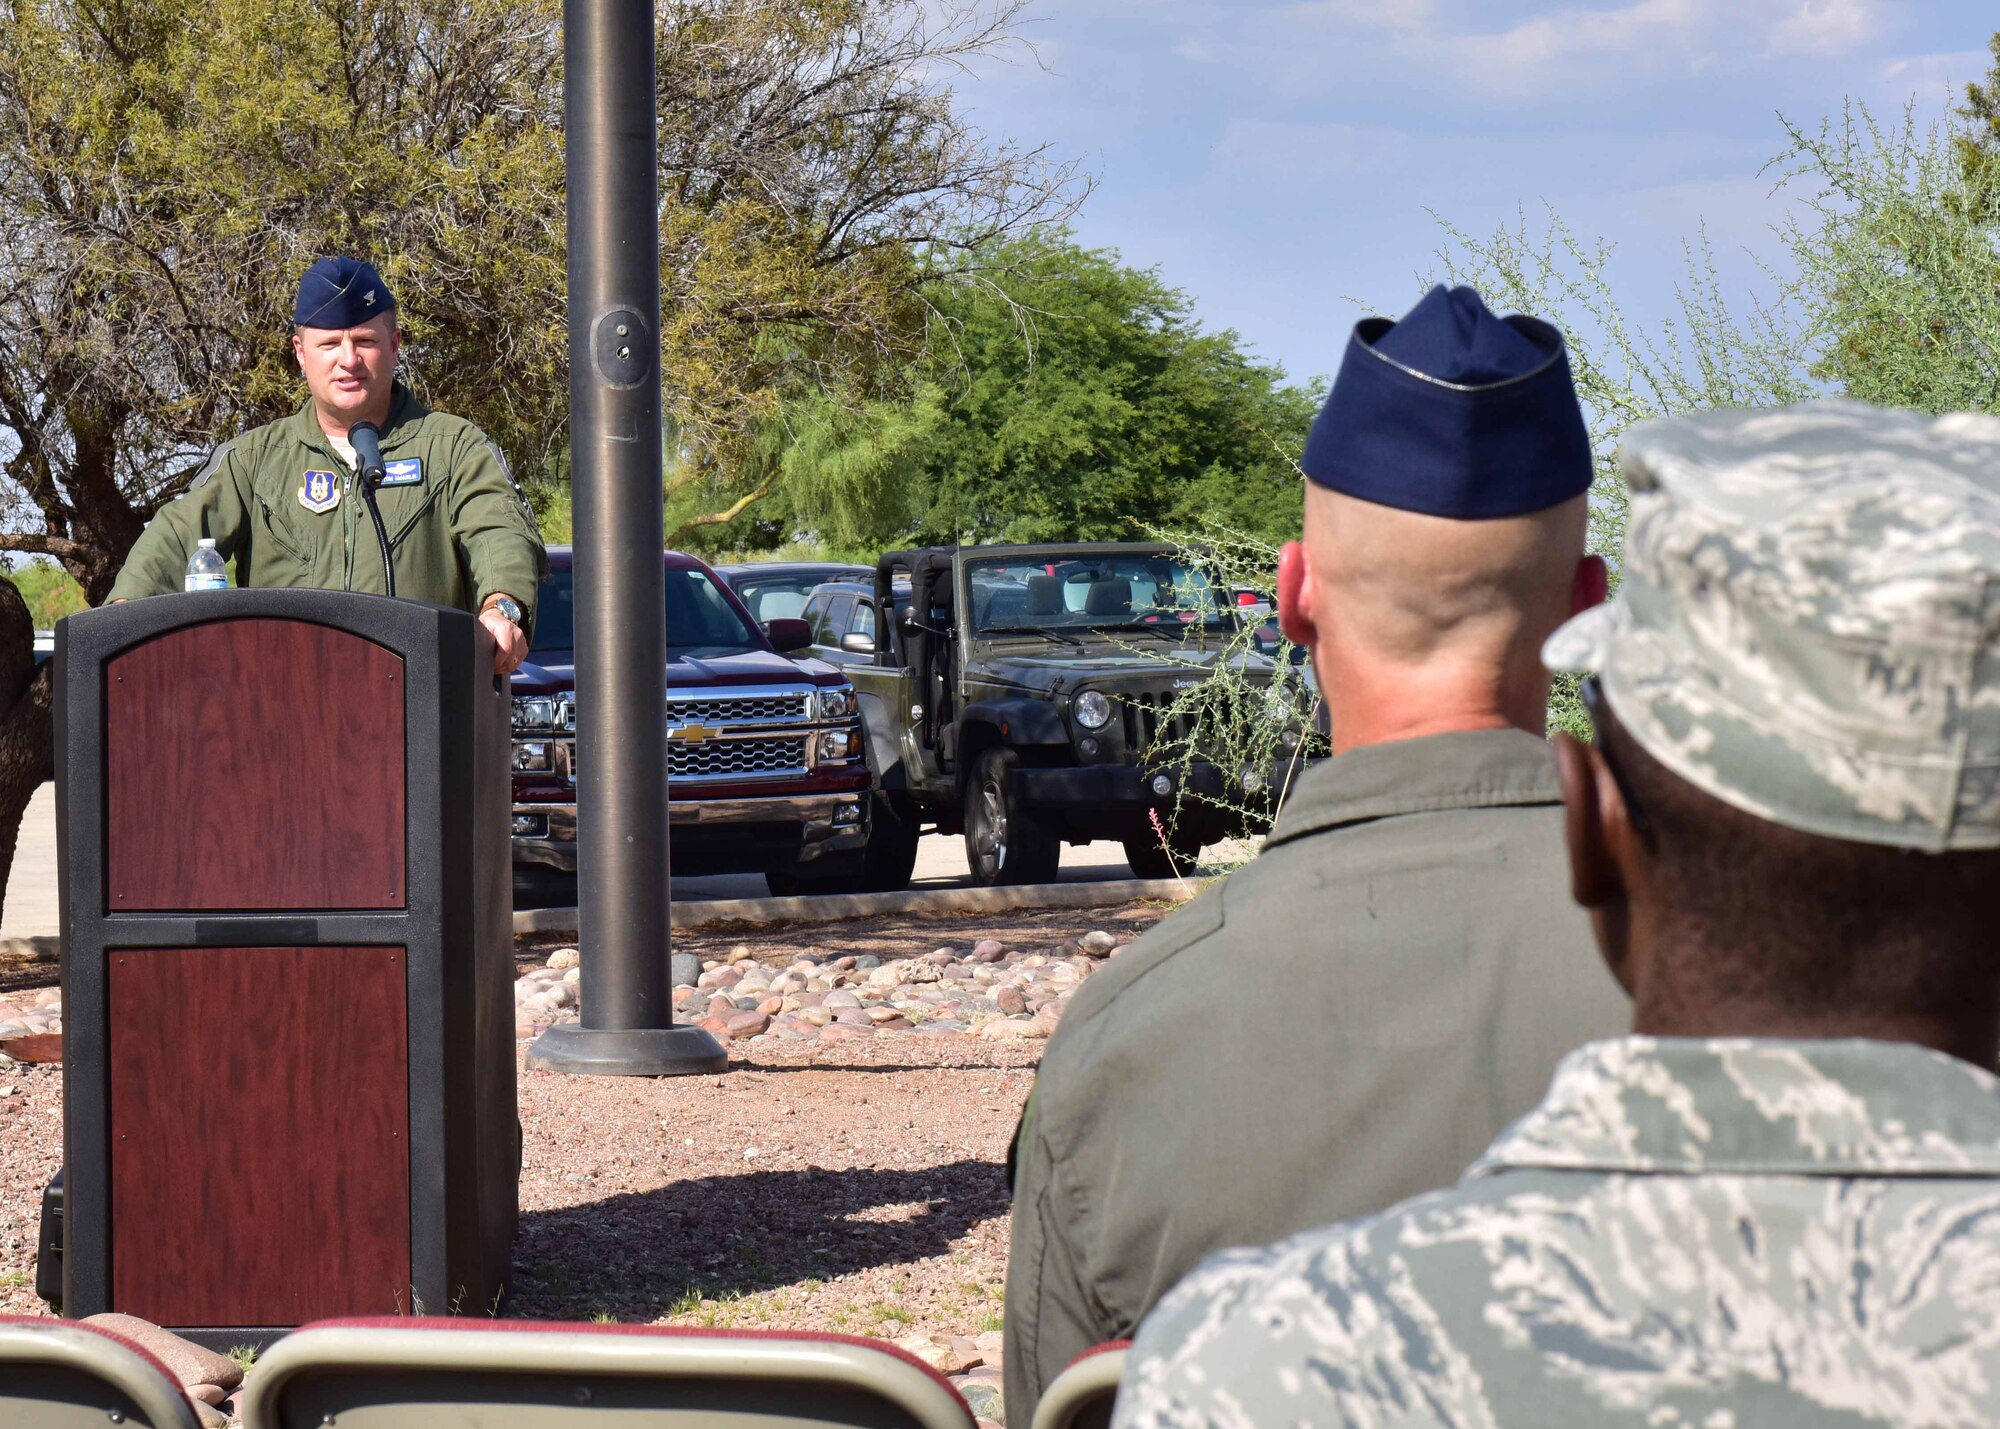 Col. Thomas McNurlin, 924th Fighter Group commander, speaks during the Fallen Hawg remembrance ceremony June 1 at Davis Monthan Air Force Base, Ariz. (U.S. Air Force photo by Tech. Sgt. Louis Vega Jr.)